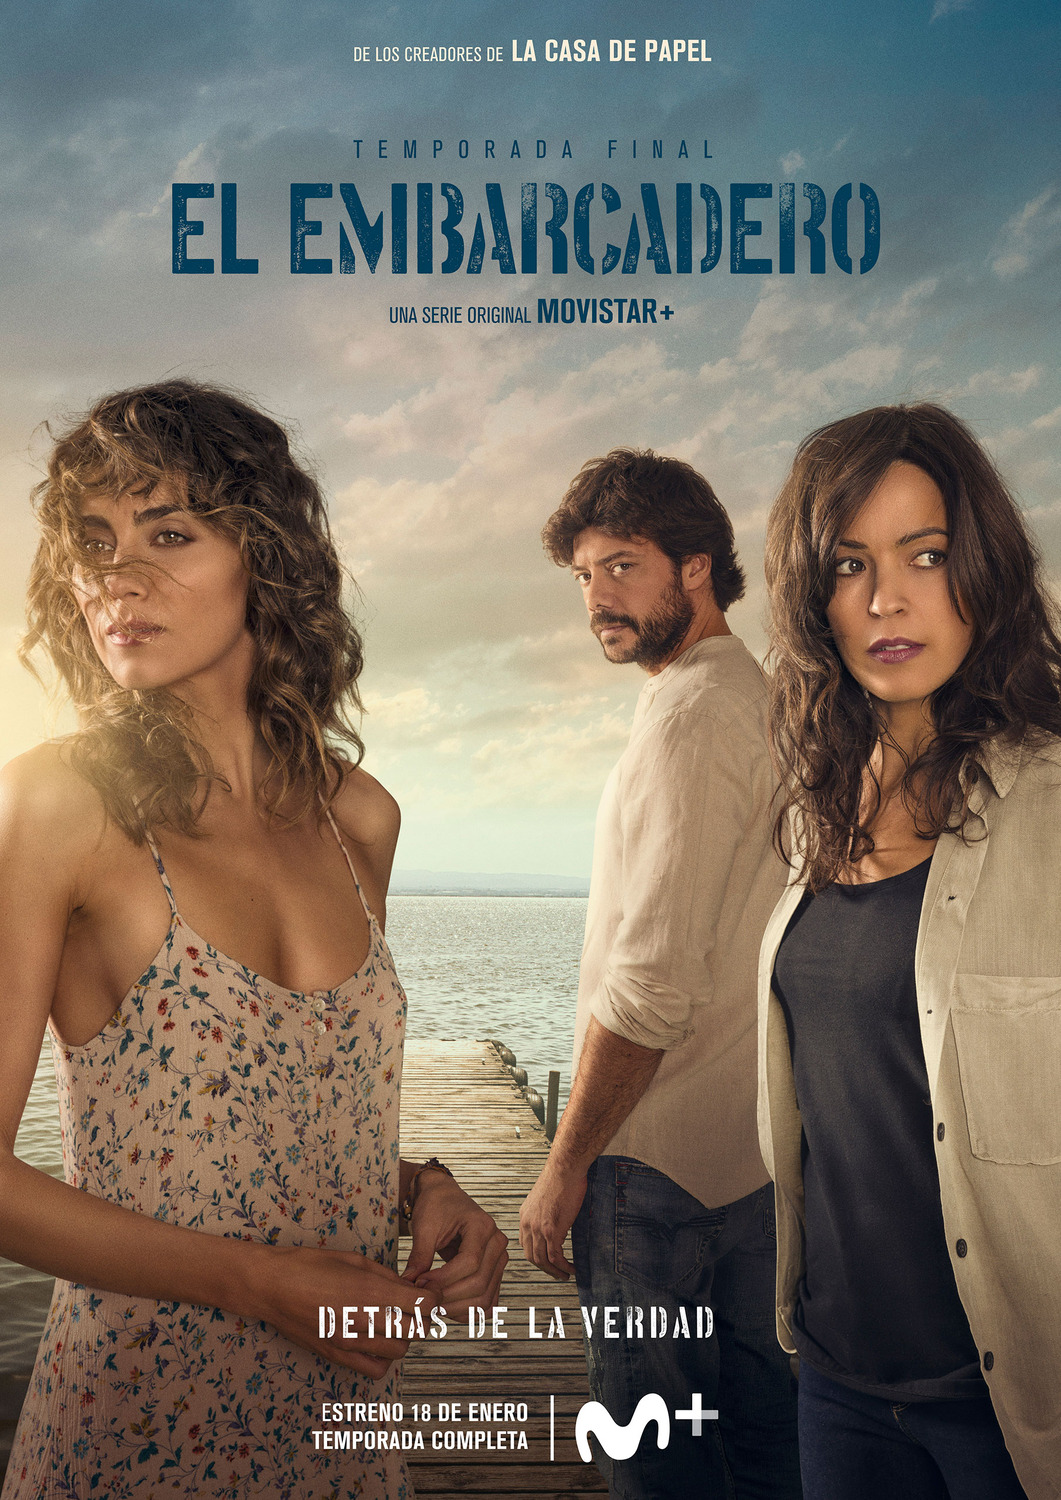 Extra Large TV Poster Image for El embarcadero (#15 of 16)